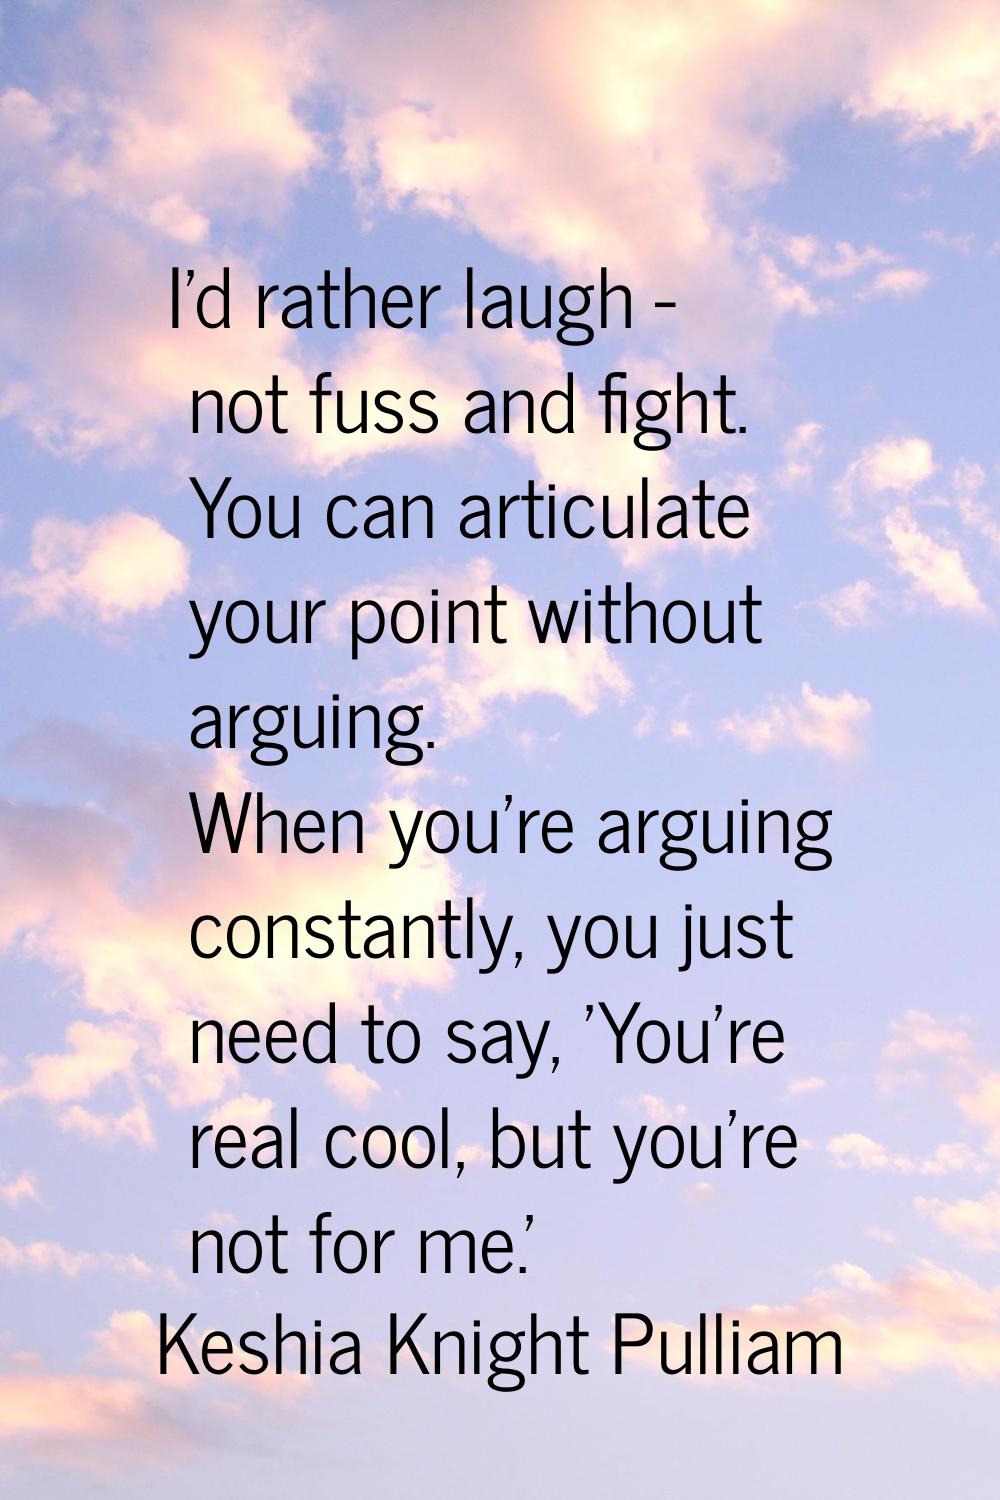 I'd rather laugh - not fuss and fight. You can articulate your point without arguing. When you're a